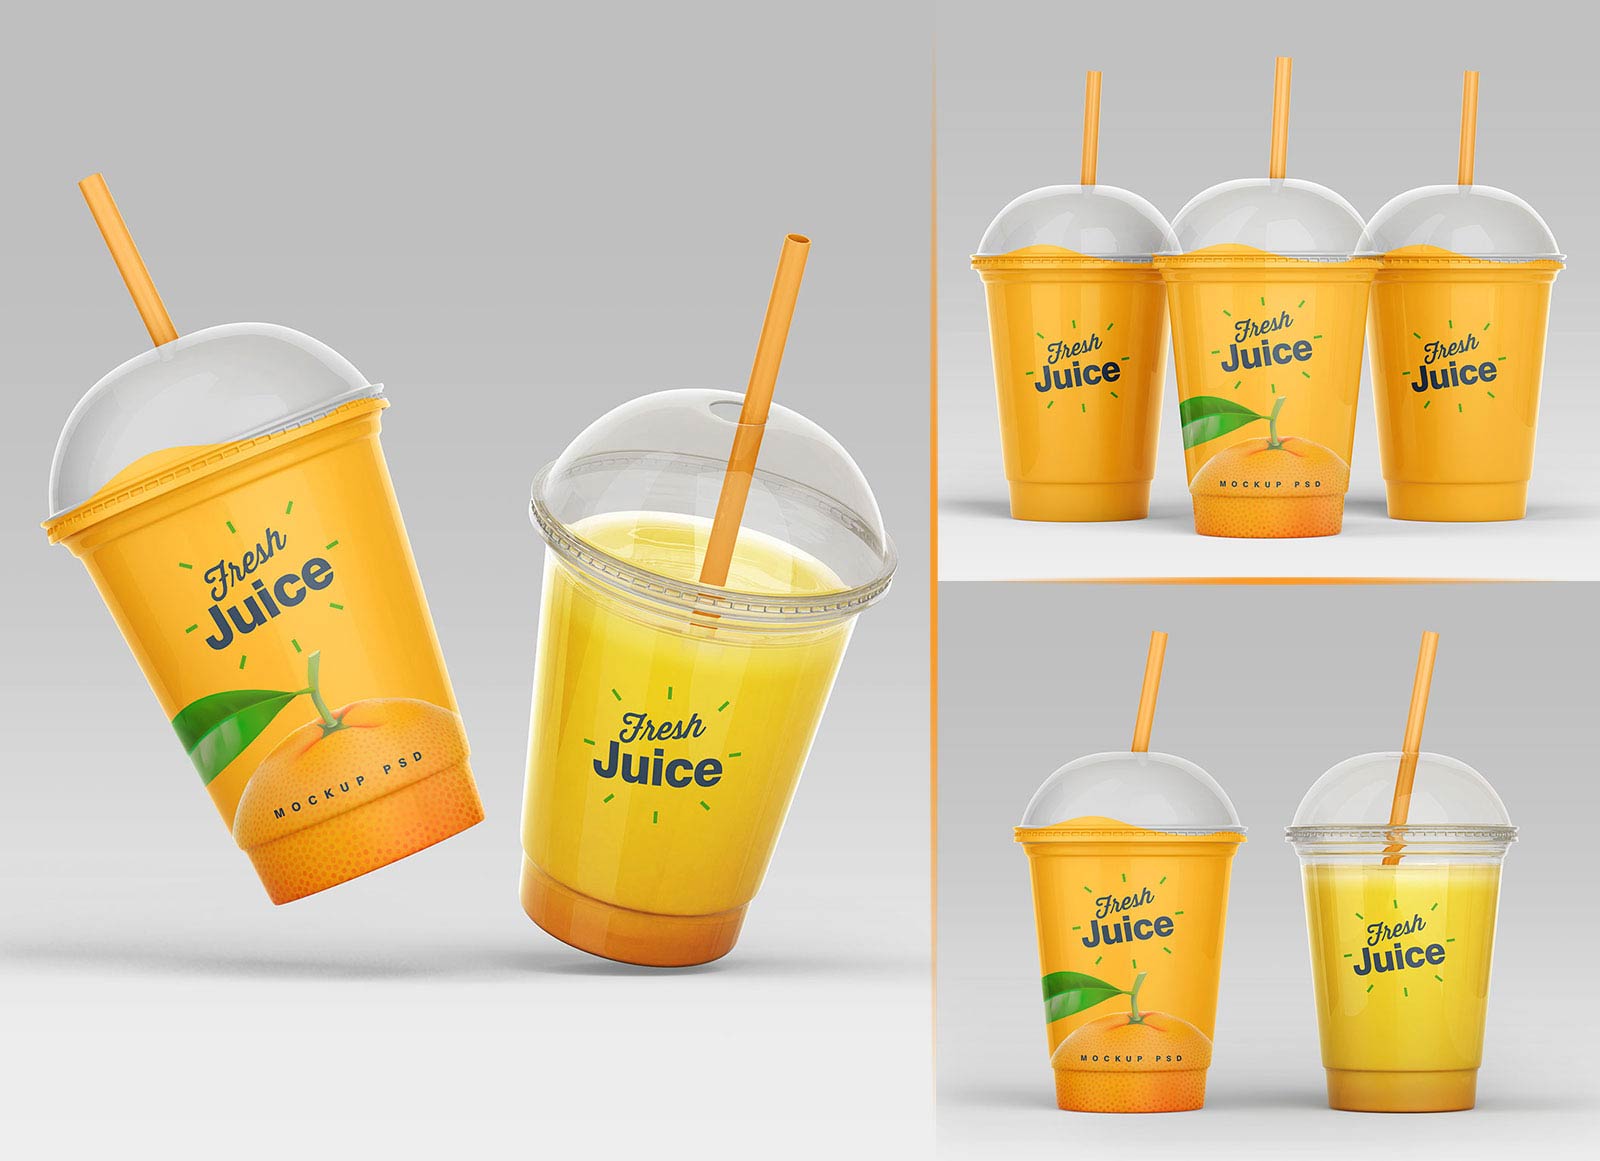 https://goodmockups.com/wp-content/uploads/2021/01/4-Free-Clear-Plastic-Disposable-Juice-Cup-With-Dome-Lid-Mockup-PSD-Set-5.jpg